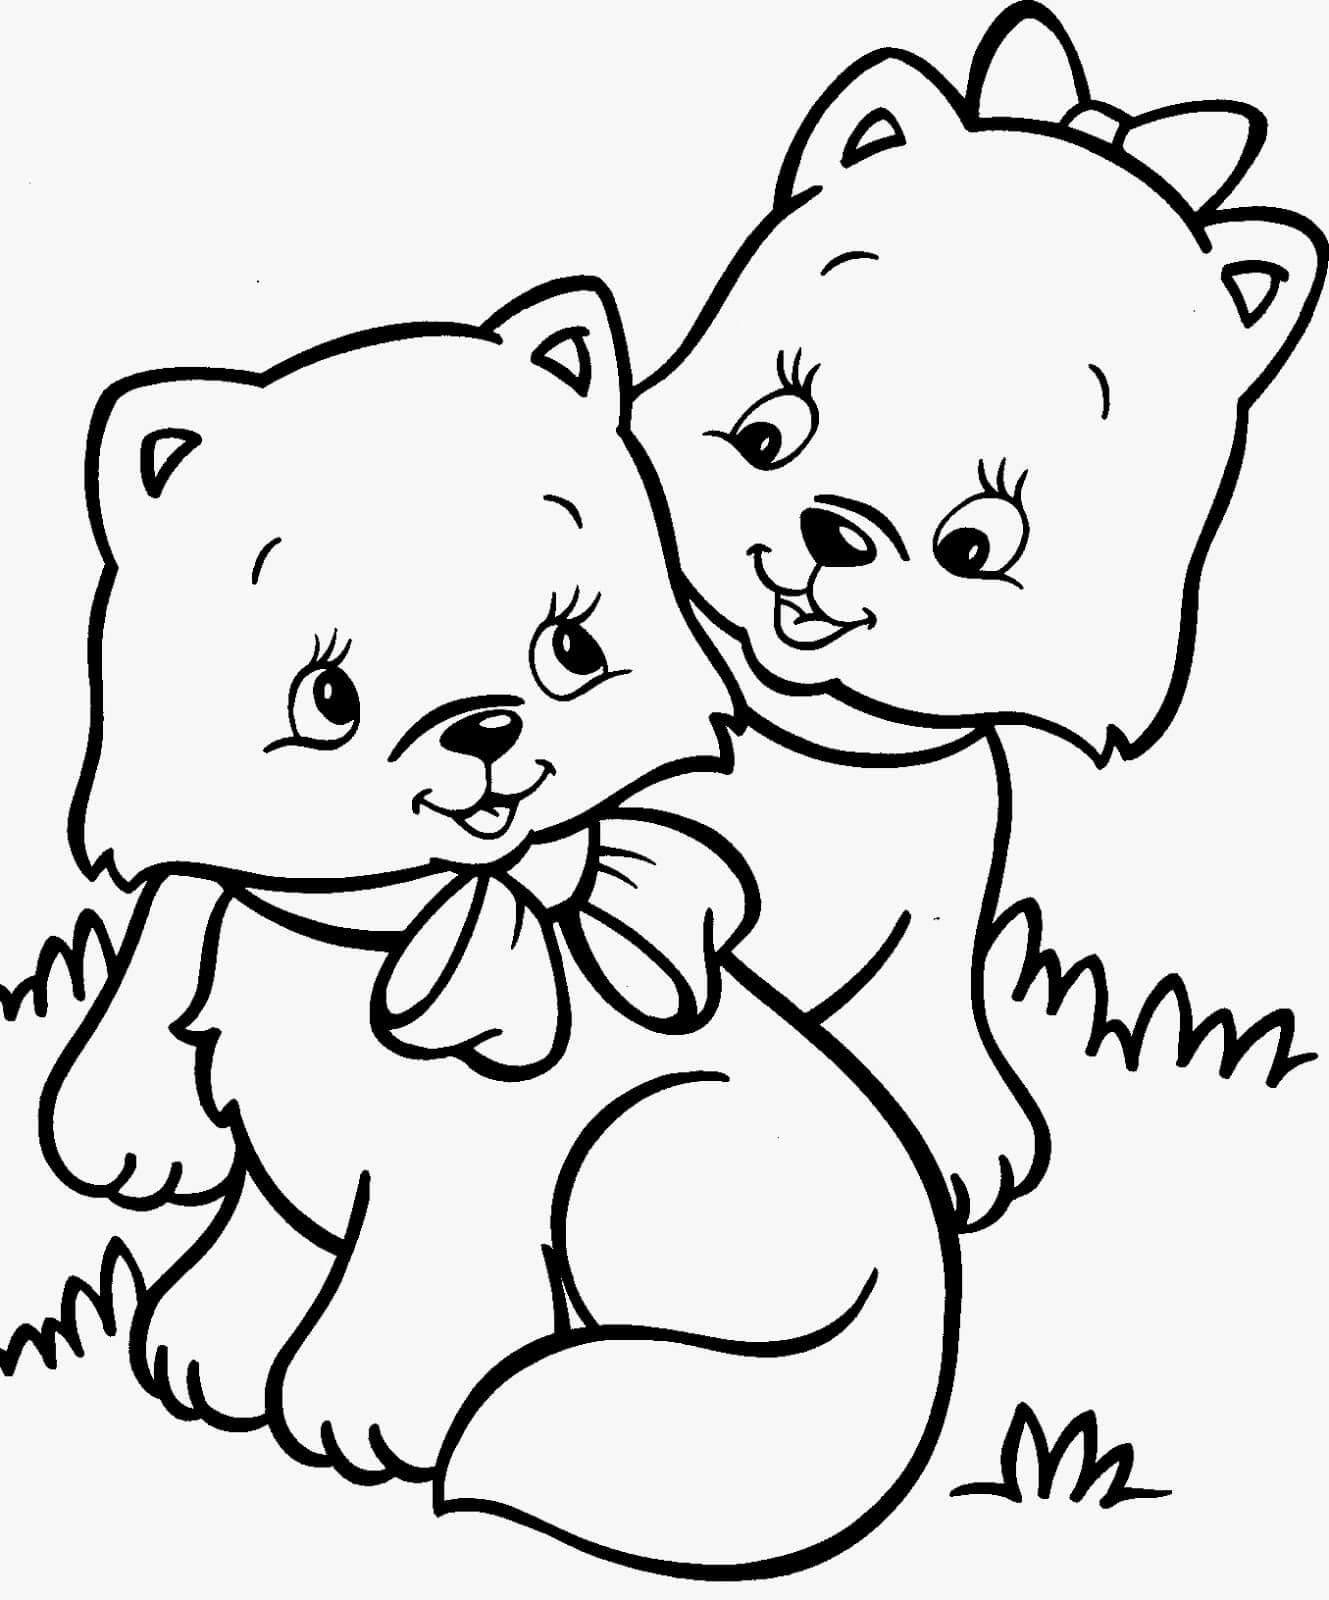 Kittens Coloring Page